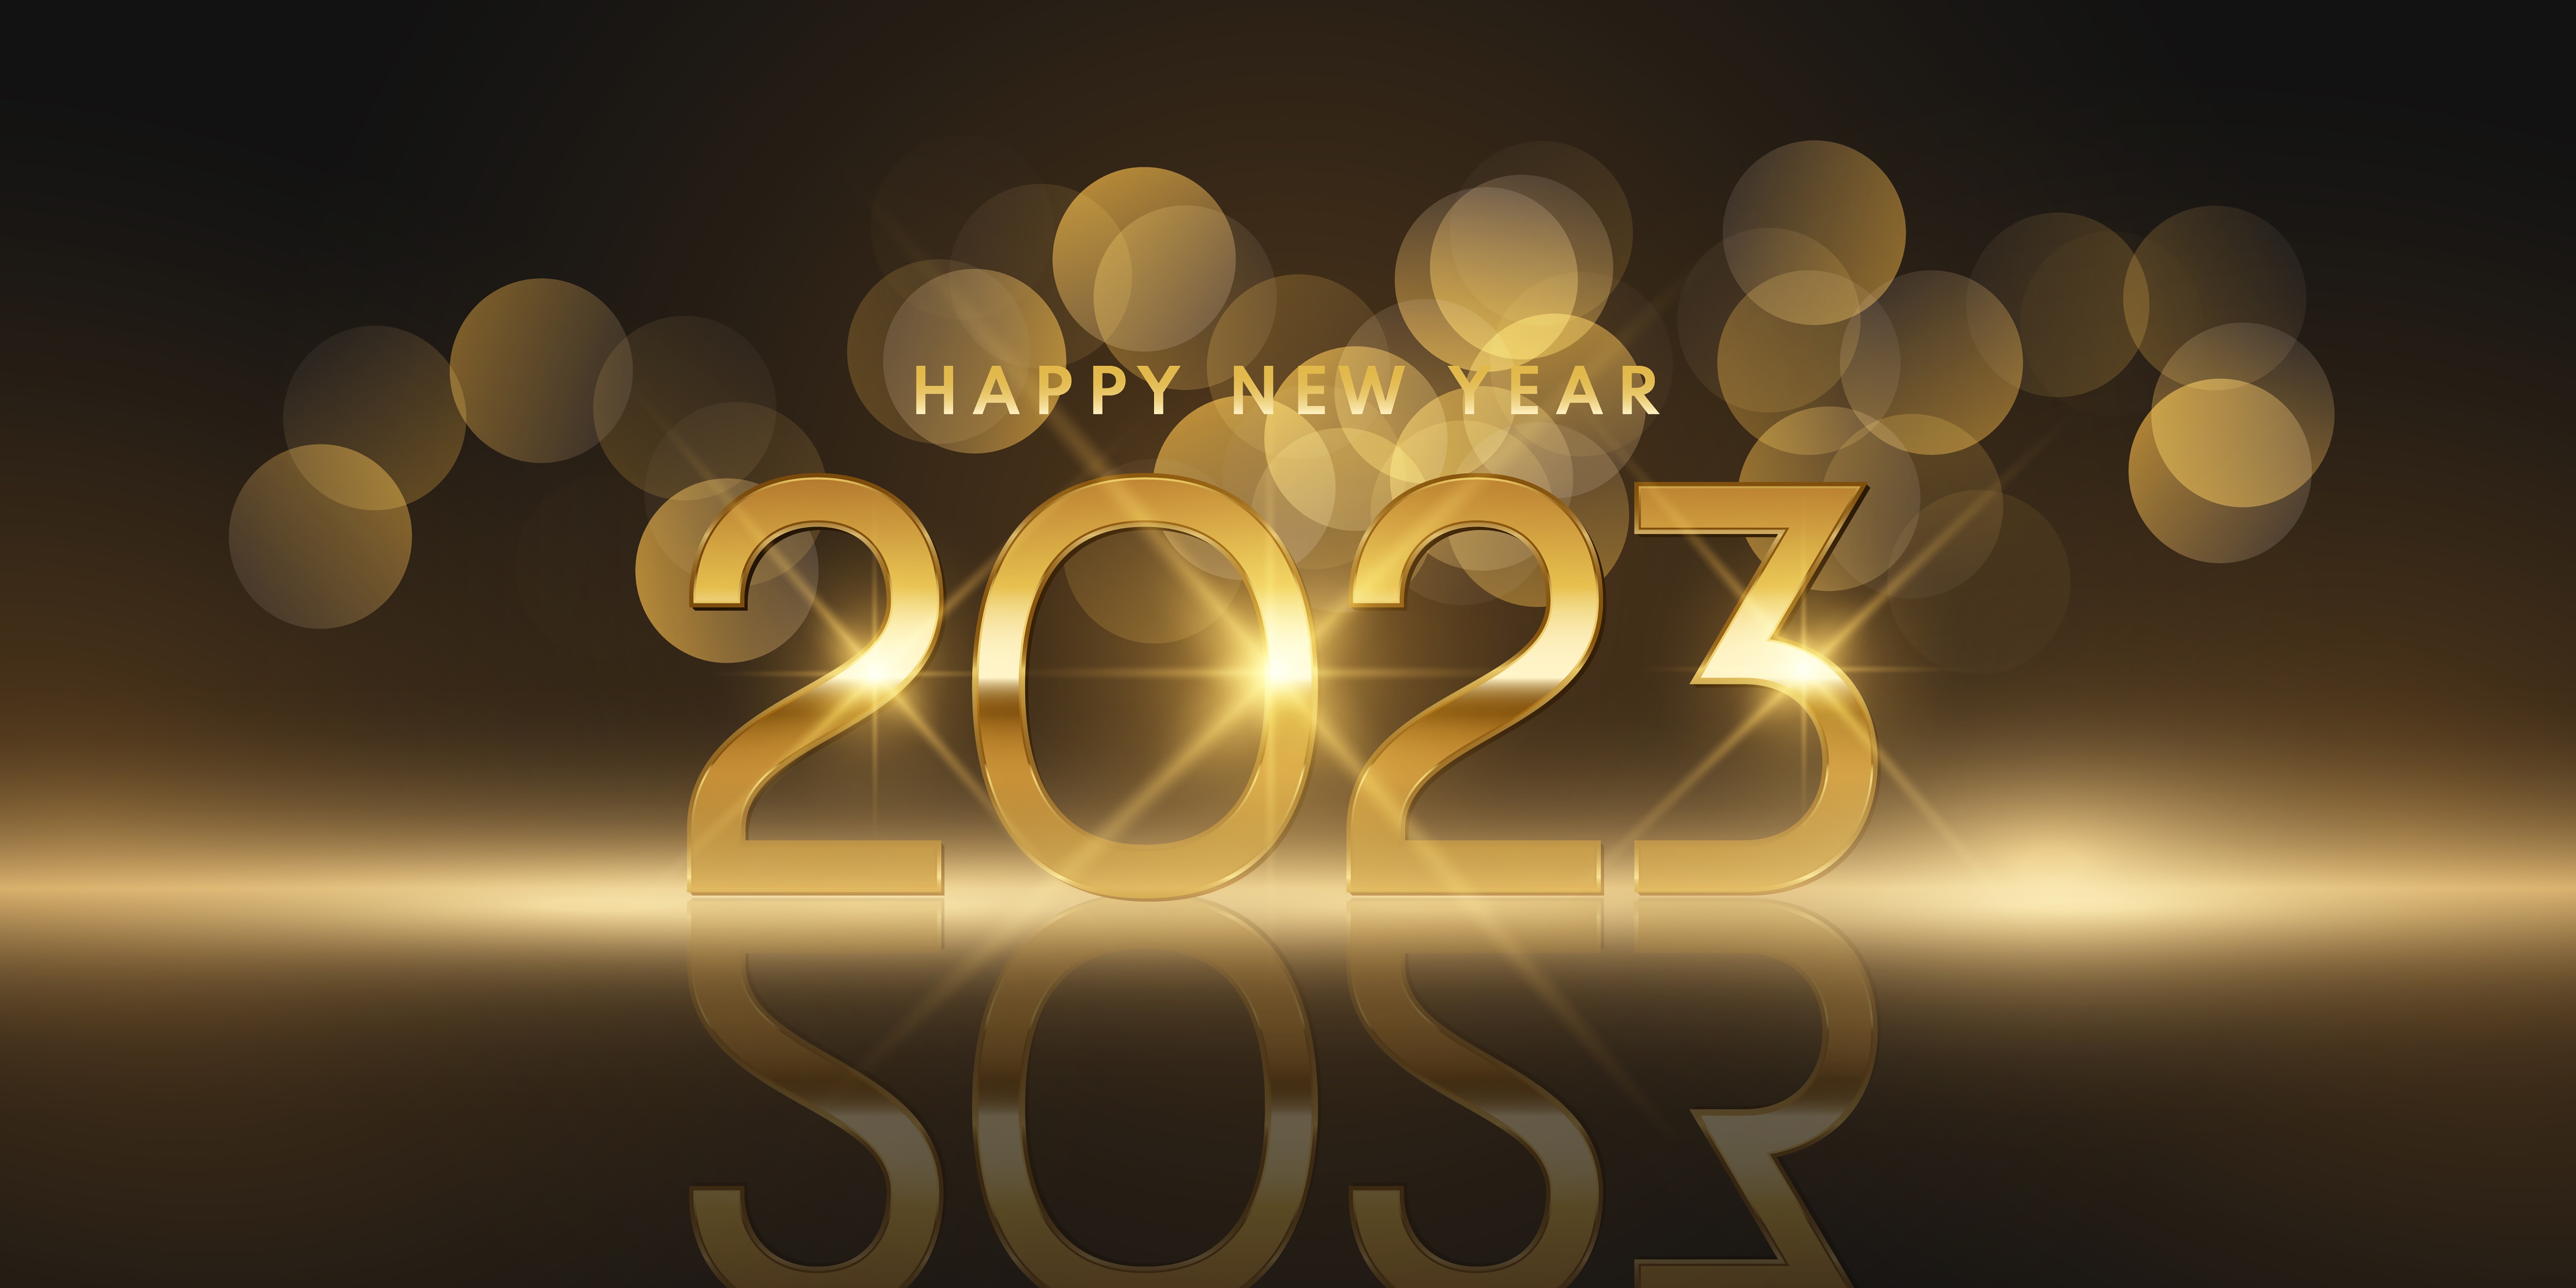 Happy New Year 2023 4k Wallpapers - Wallpaper Cave